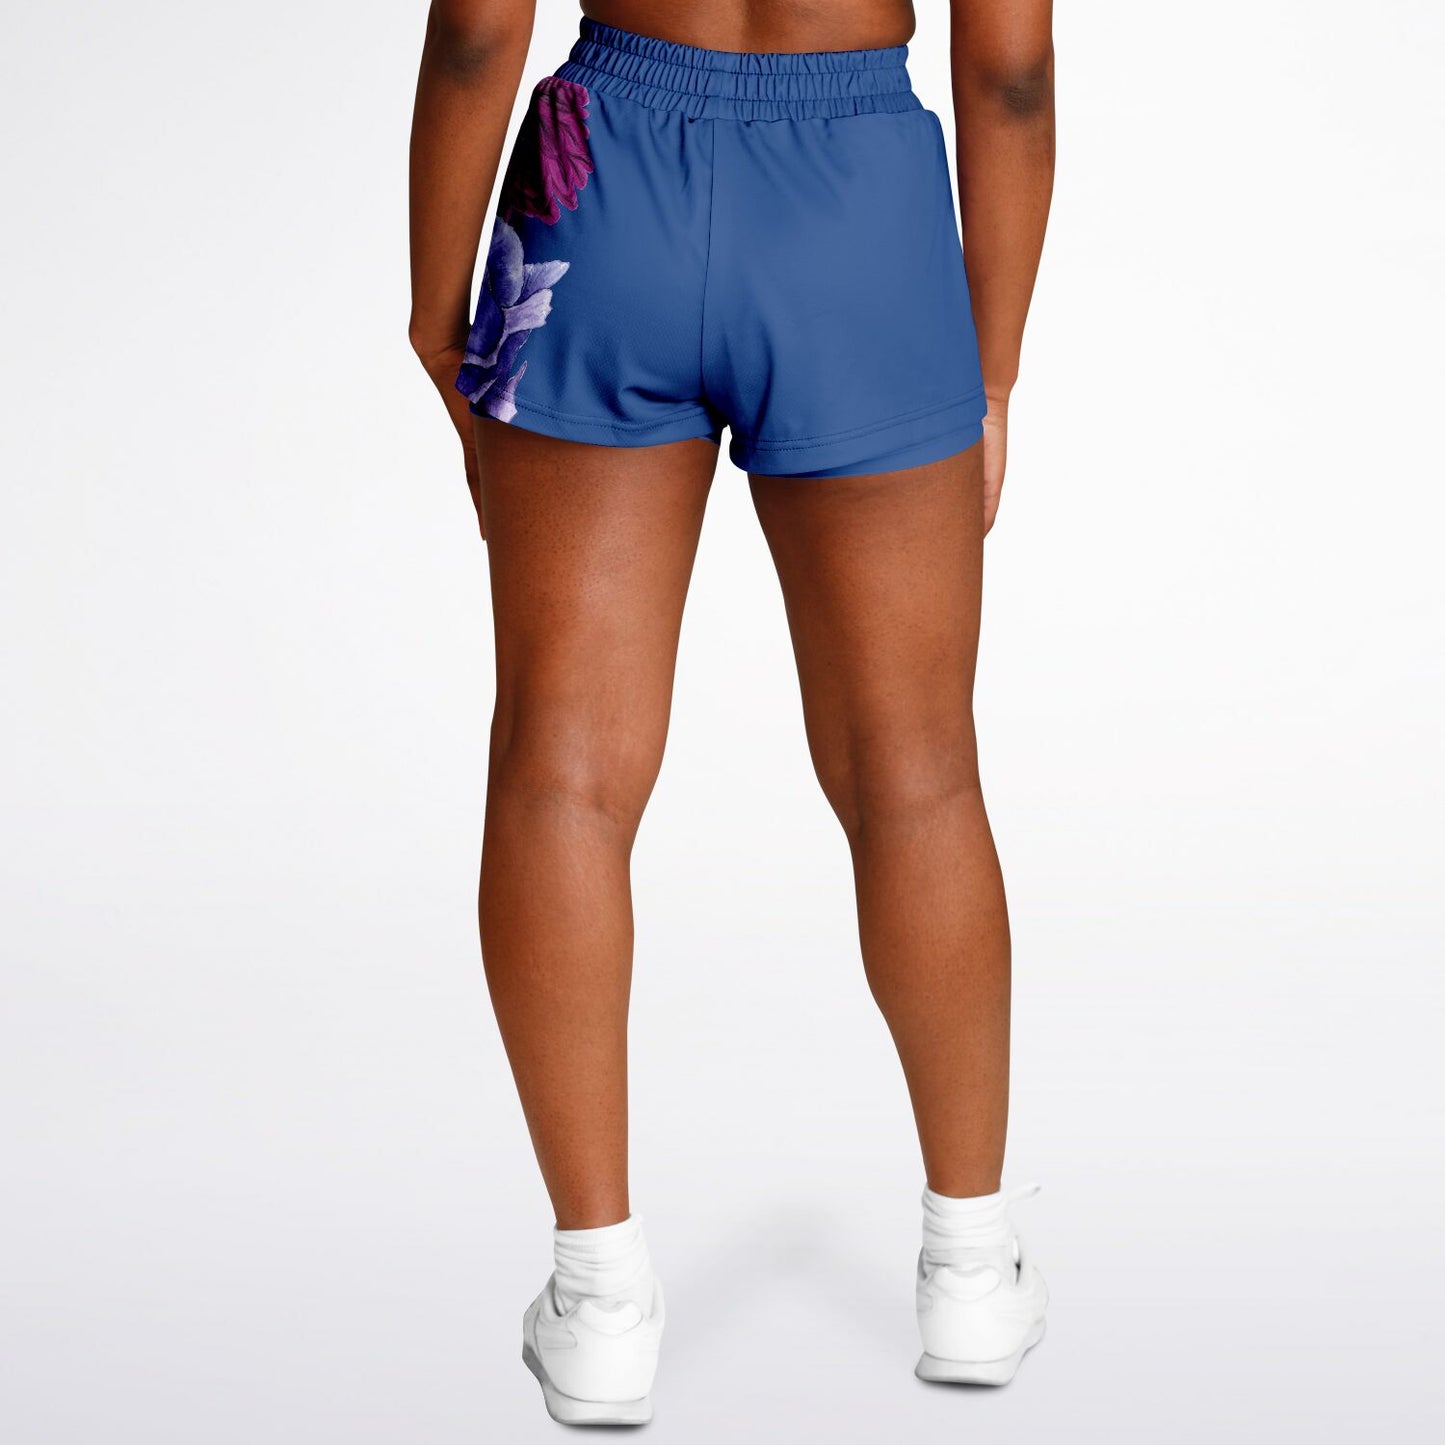 2 in 1 athletic shorts